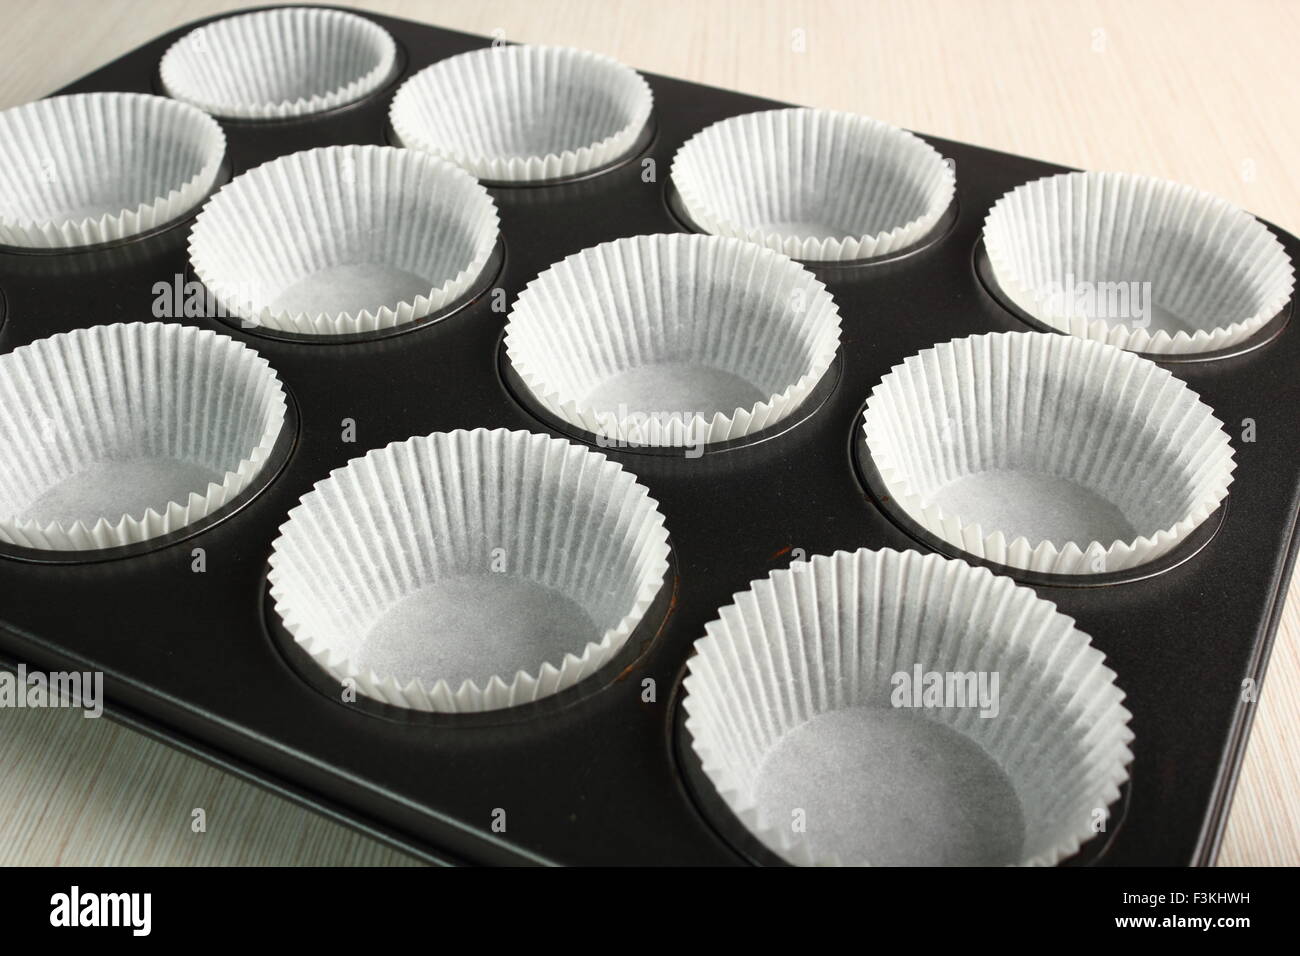 https://c8.alamy.com/comp/F3KHWH/muffin-pan-and-cupcake-liners-F3KHWH.jpg